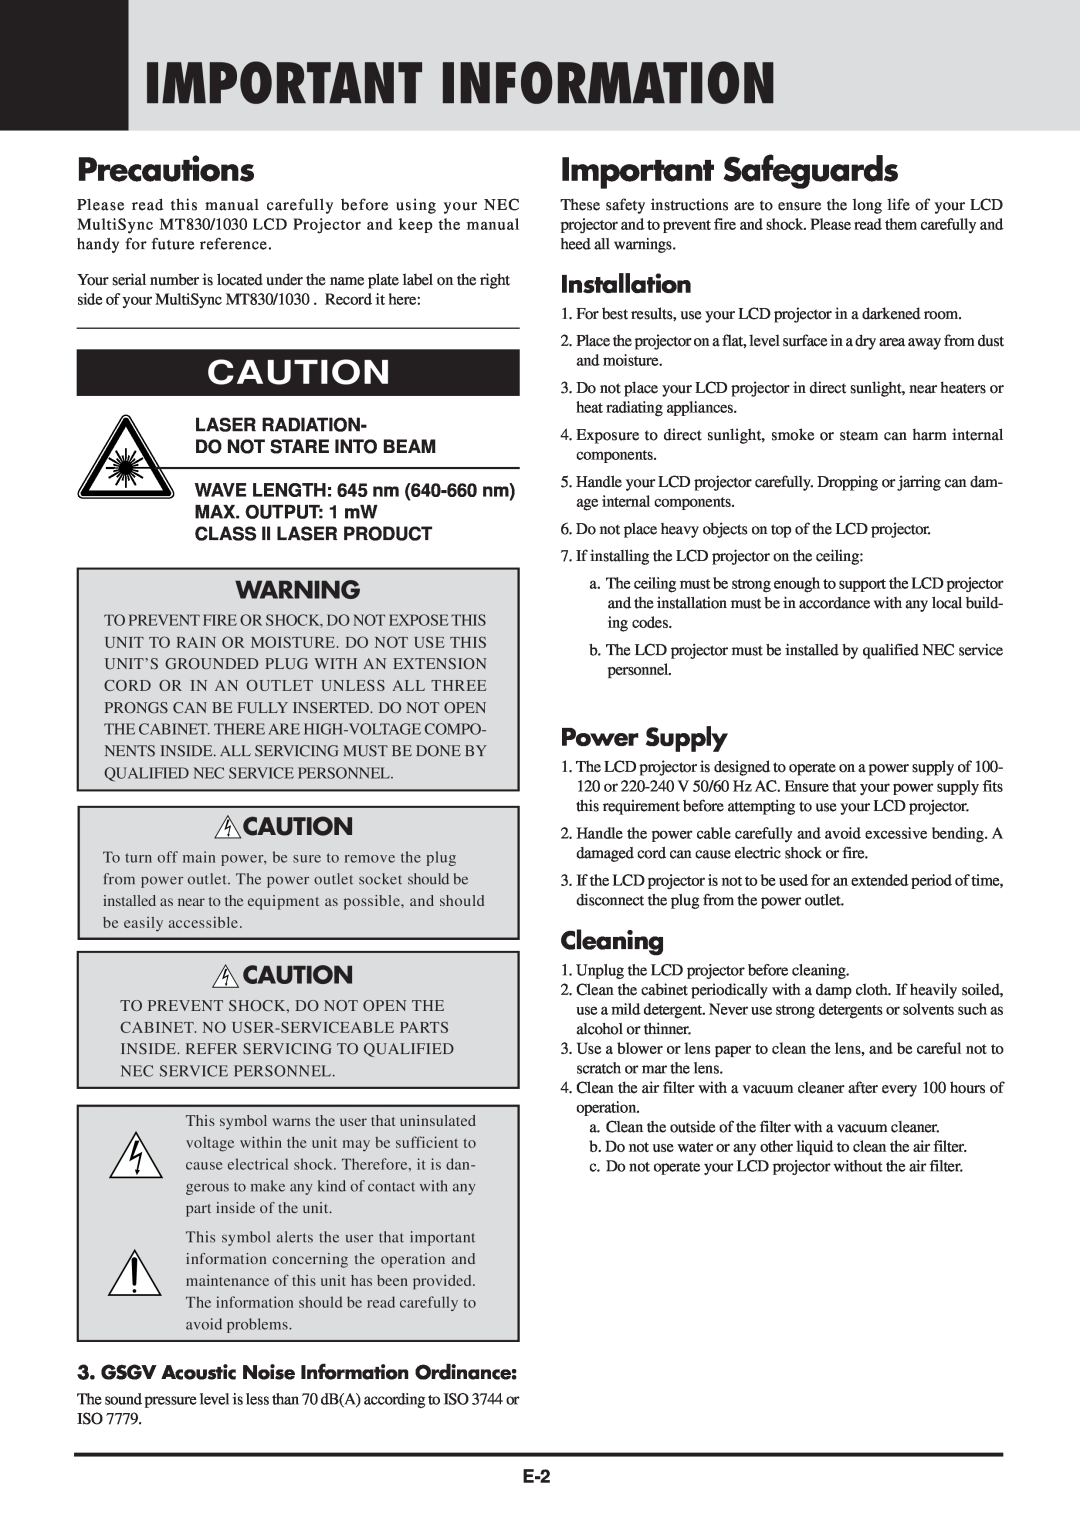 NEC MT830 user manual Important Information, Precautions, Important Safeguards, Installation, Power Supply, Cleaning 